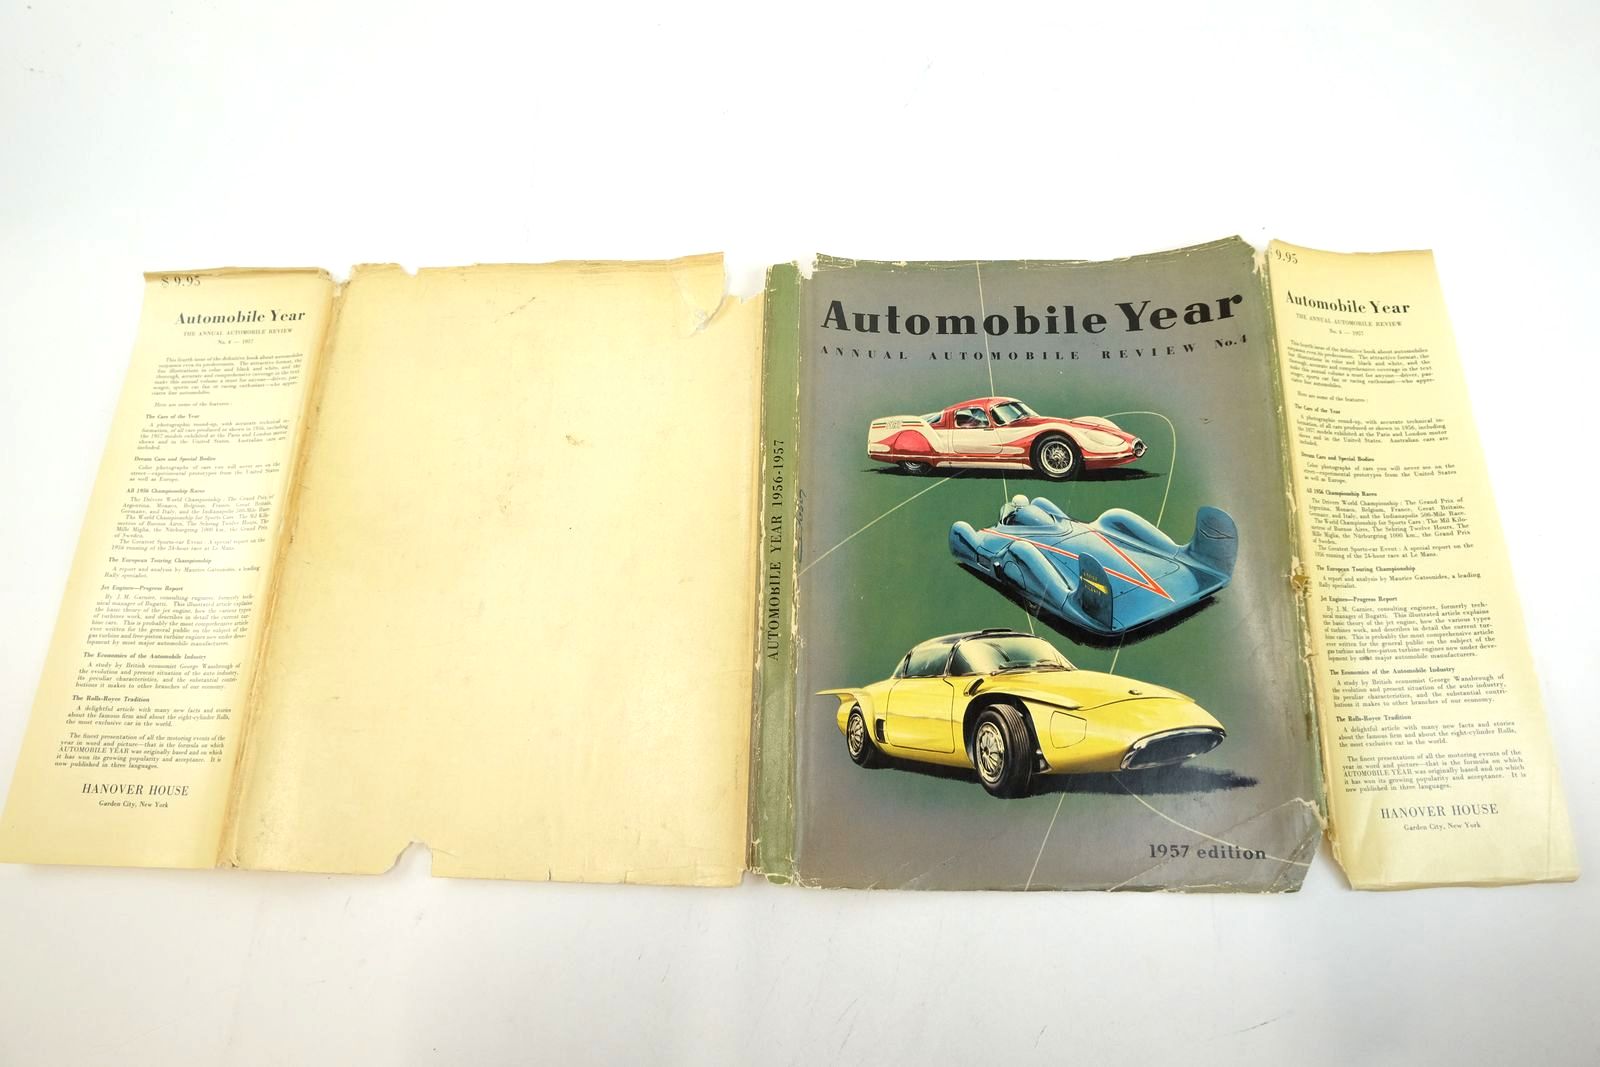 Photo of AUTOMOBILE YEAR 1956-1957 ANNUAL AUTOMOBILE REVIEW No. 4 published by Edita S.A. Lausanne (STOCK CODE: 2135375)  for sale by Stella & Rose's Books